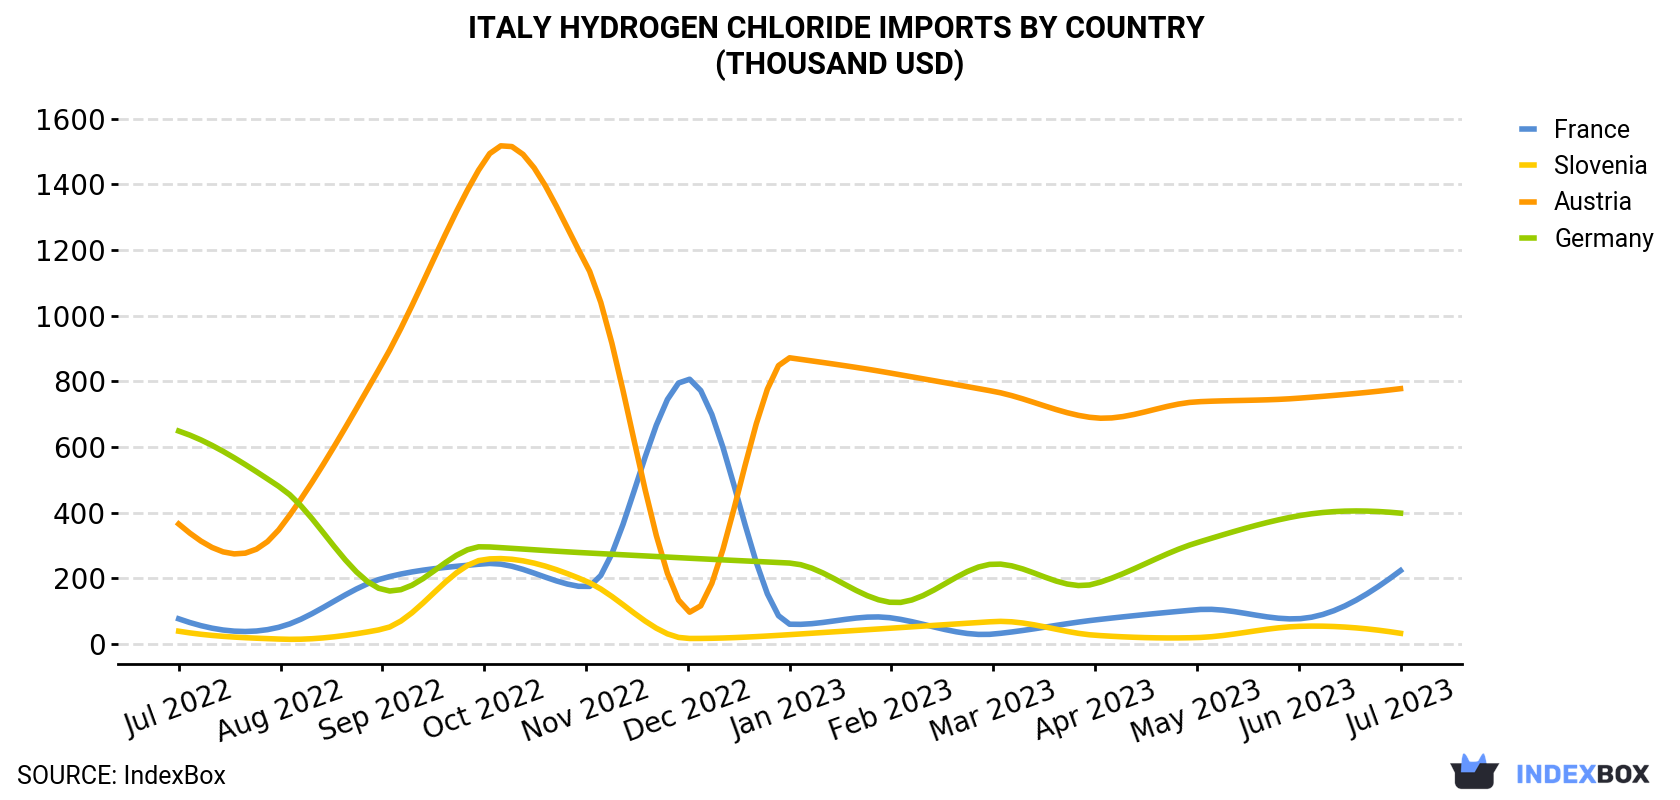 Italy Hydrogen Chloride Imports By Country (Thousand USD)